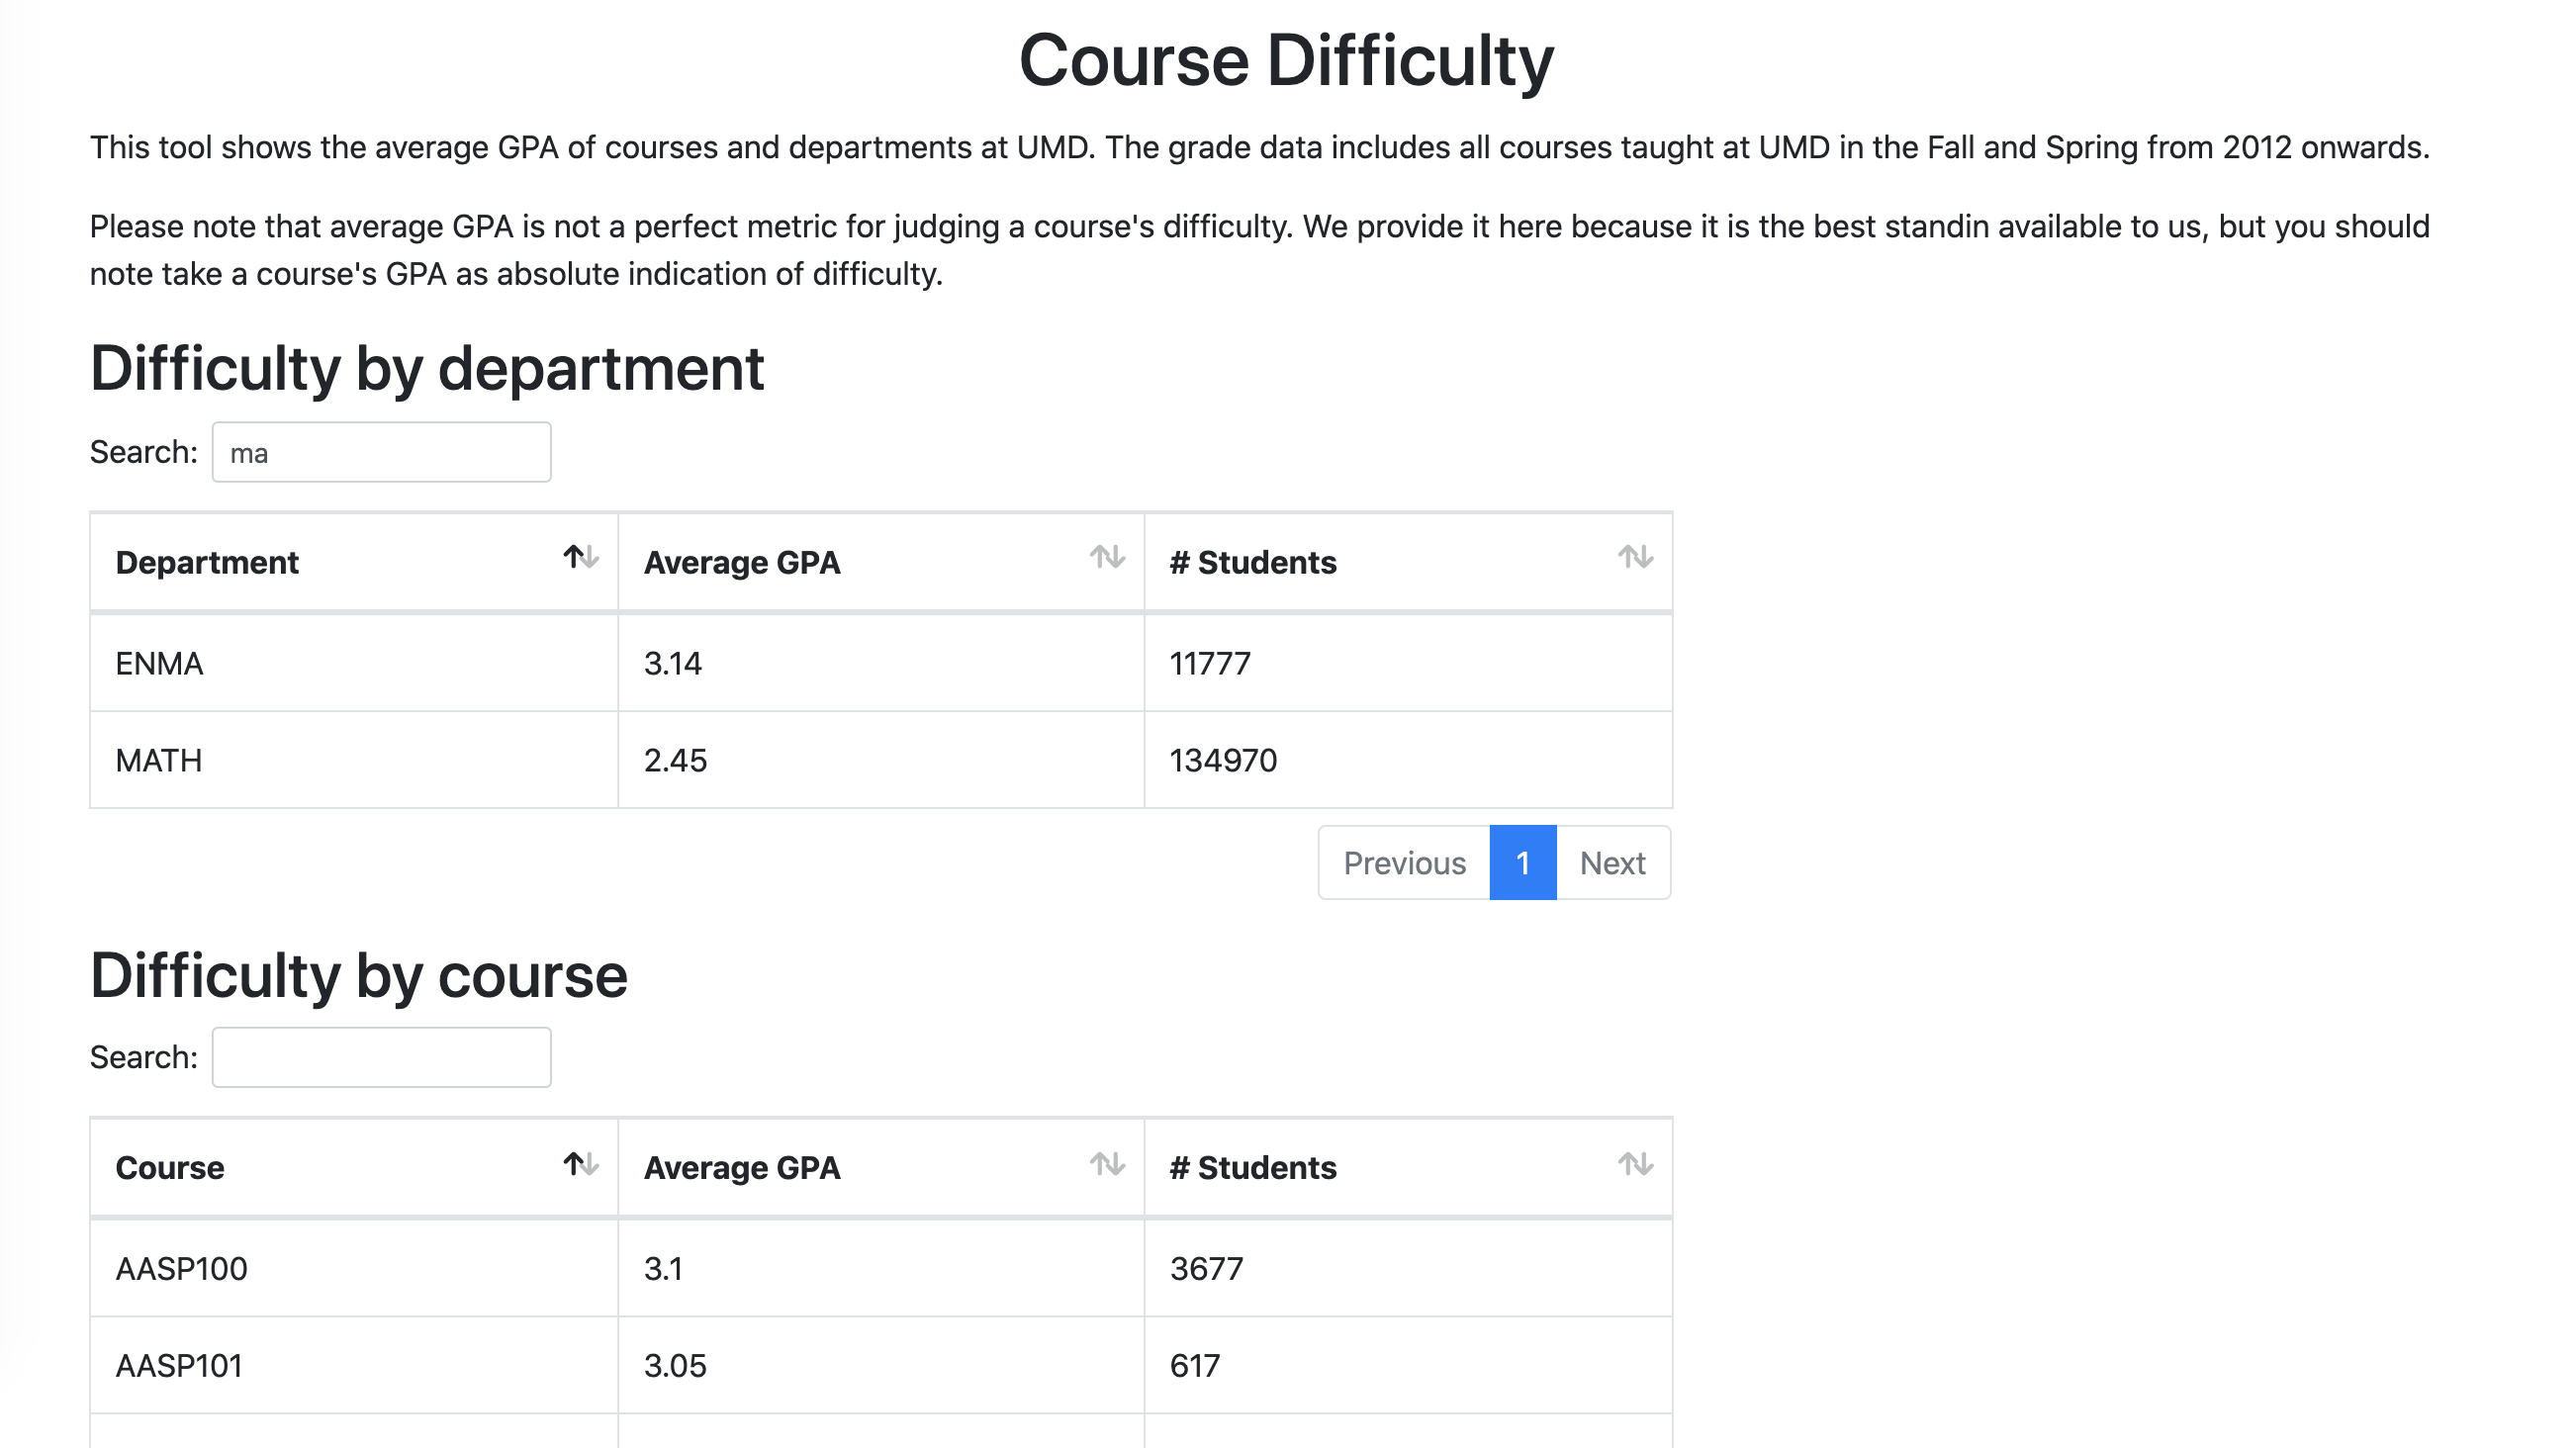 A screenshot of a page titled "Easiest & Hardest Courses & Departments at UMD". UMD stands for University of Maryland. There are two tables with headers "Difficulty by department" and "Difficulty by course". These list each department and course on PlanetTerp as well as their average GPA and the number of students in each.